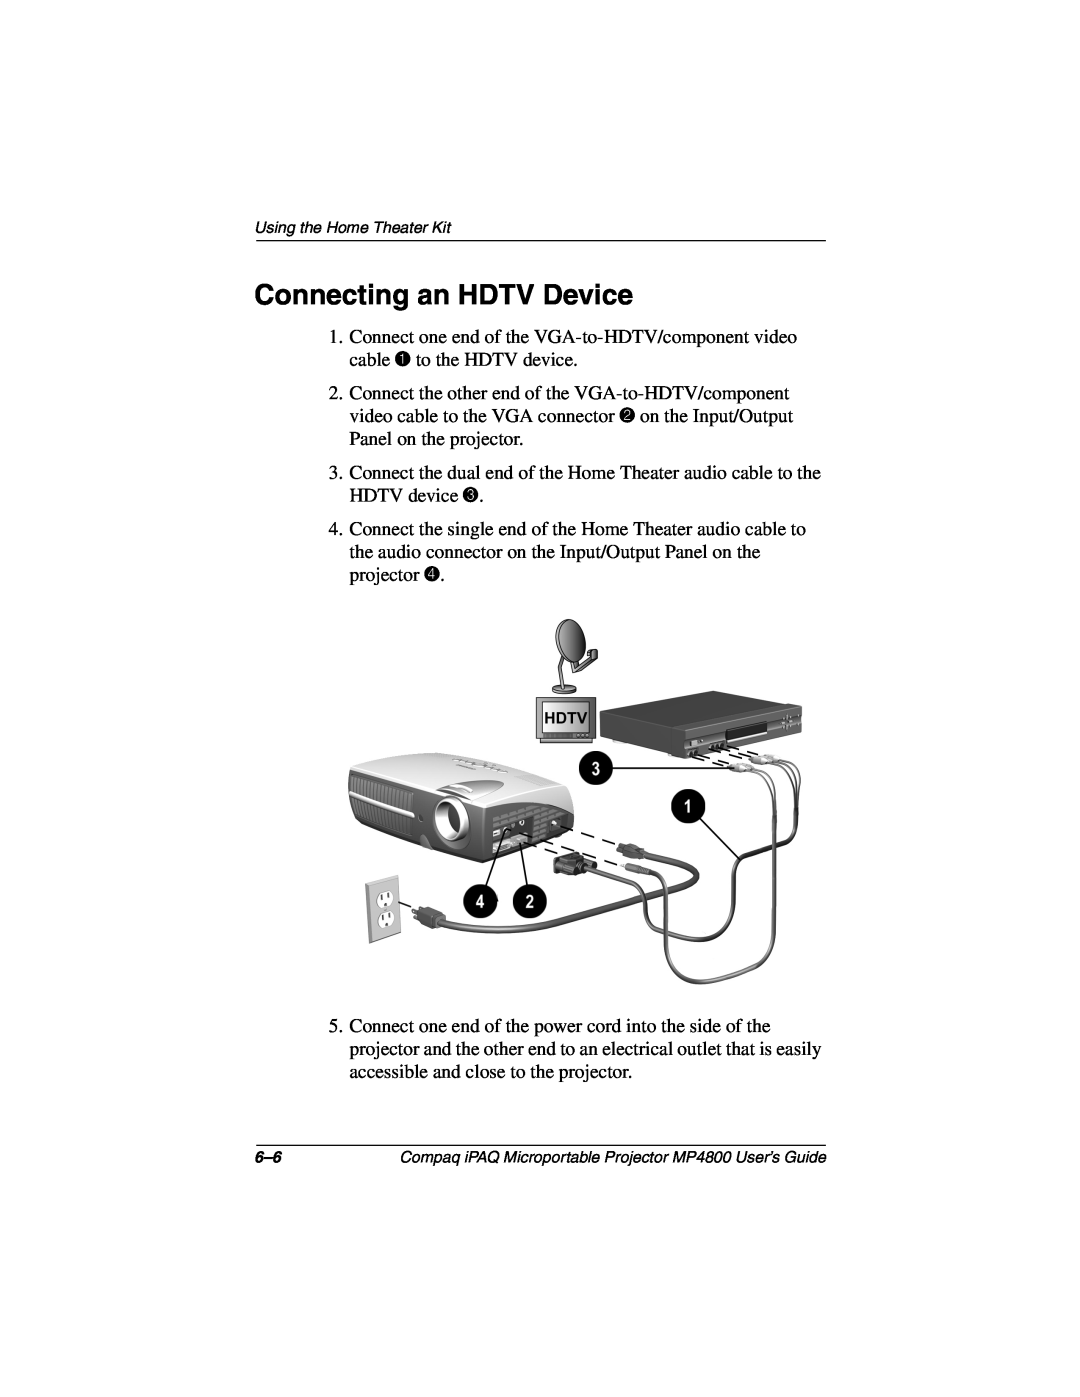 Compaq MP4800 manual Connecting an HDTV Device 